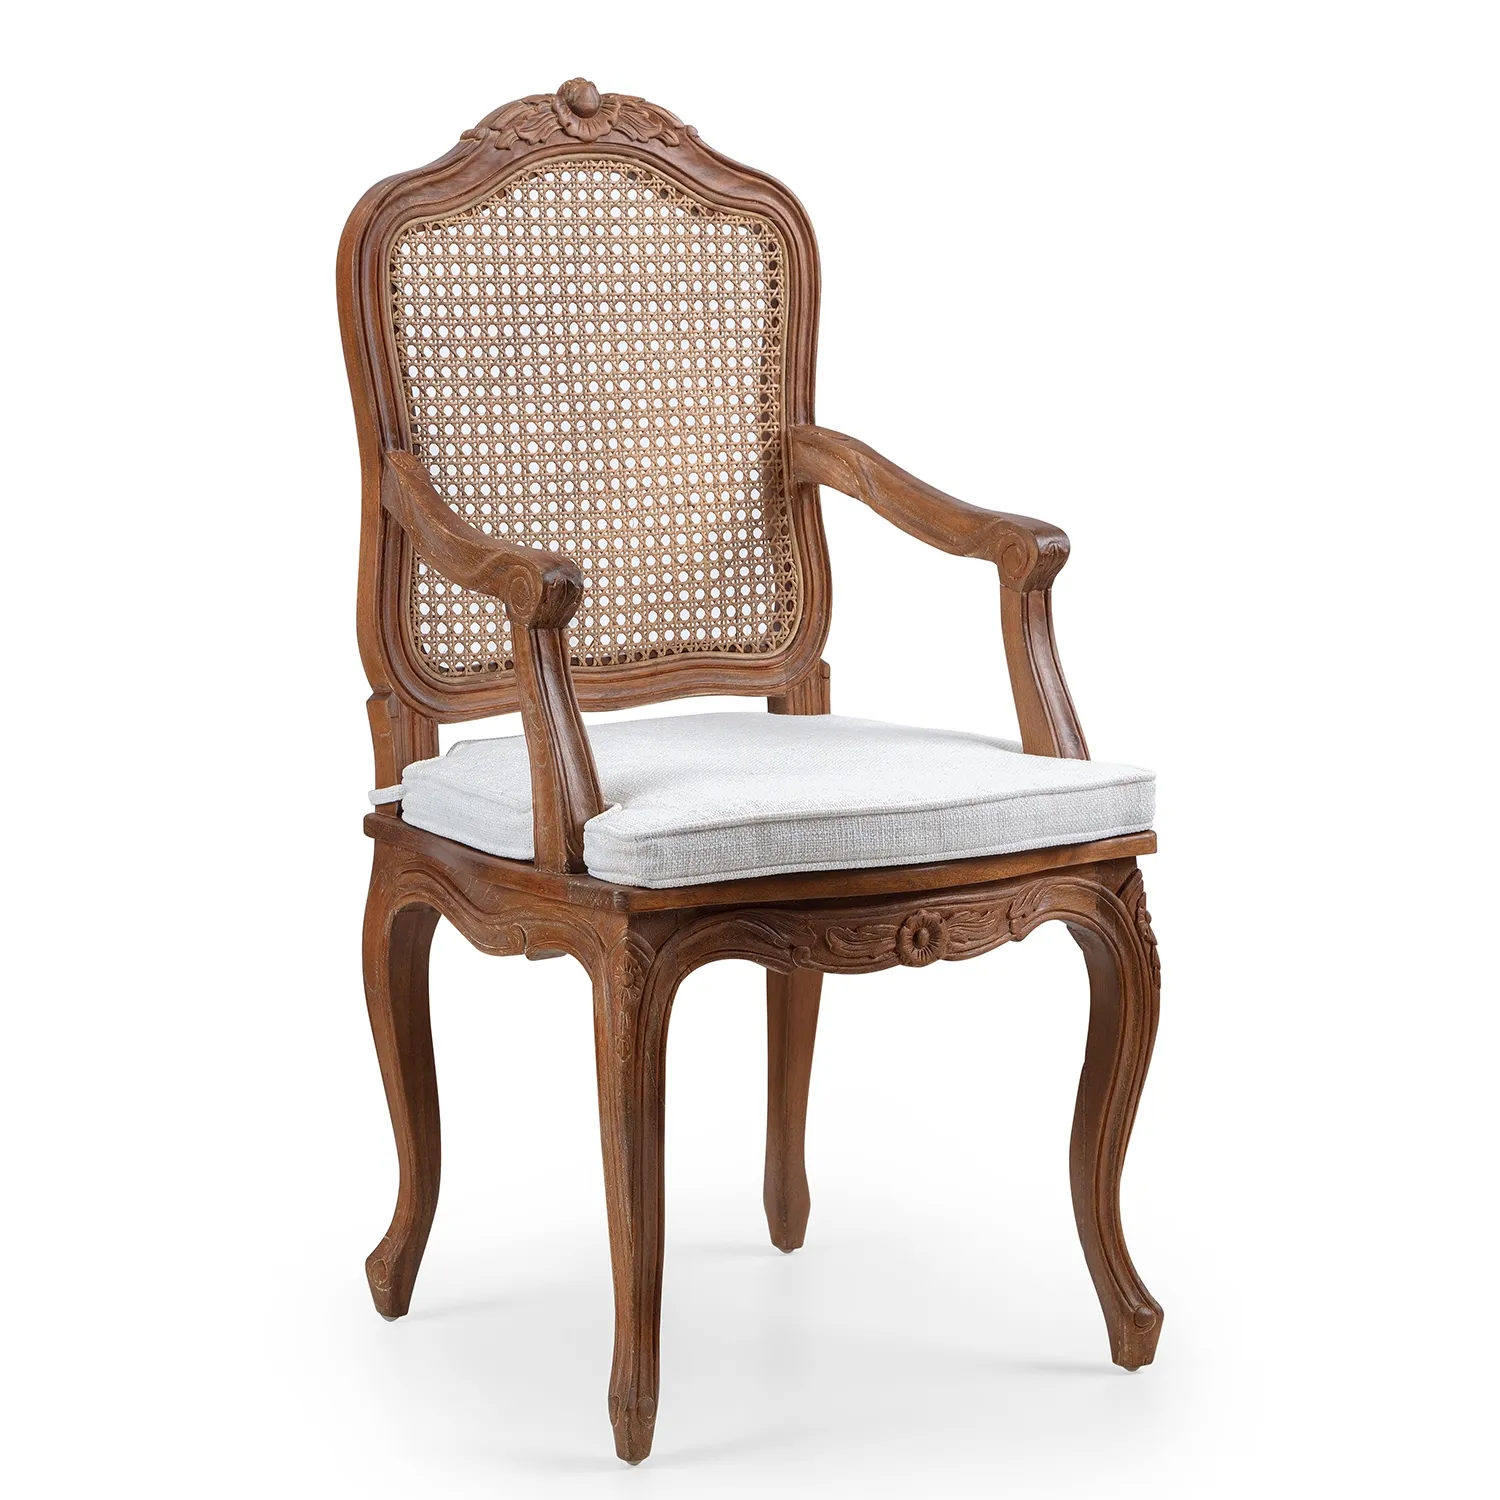 Louis French Rattan Back Carver A very comfortable yet stunning French style carver. It looks gorgeous and would complement any